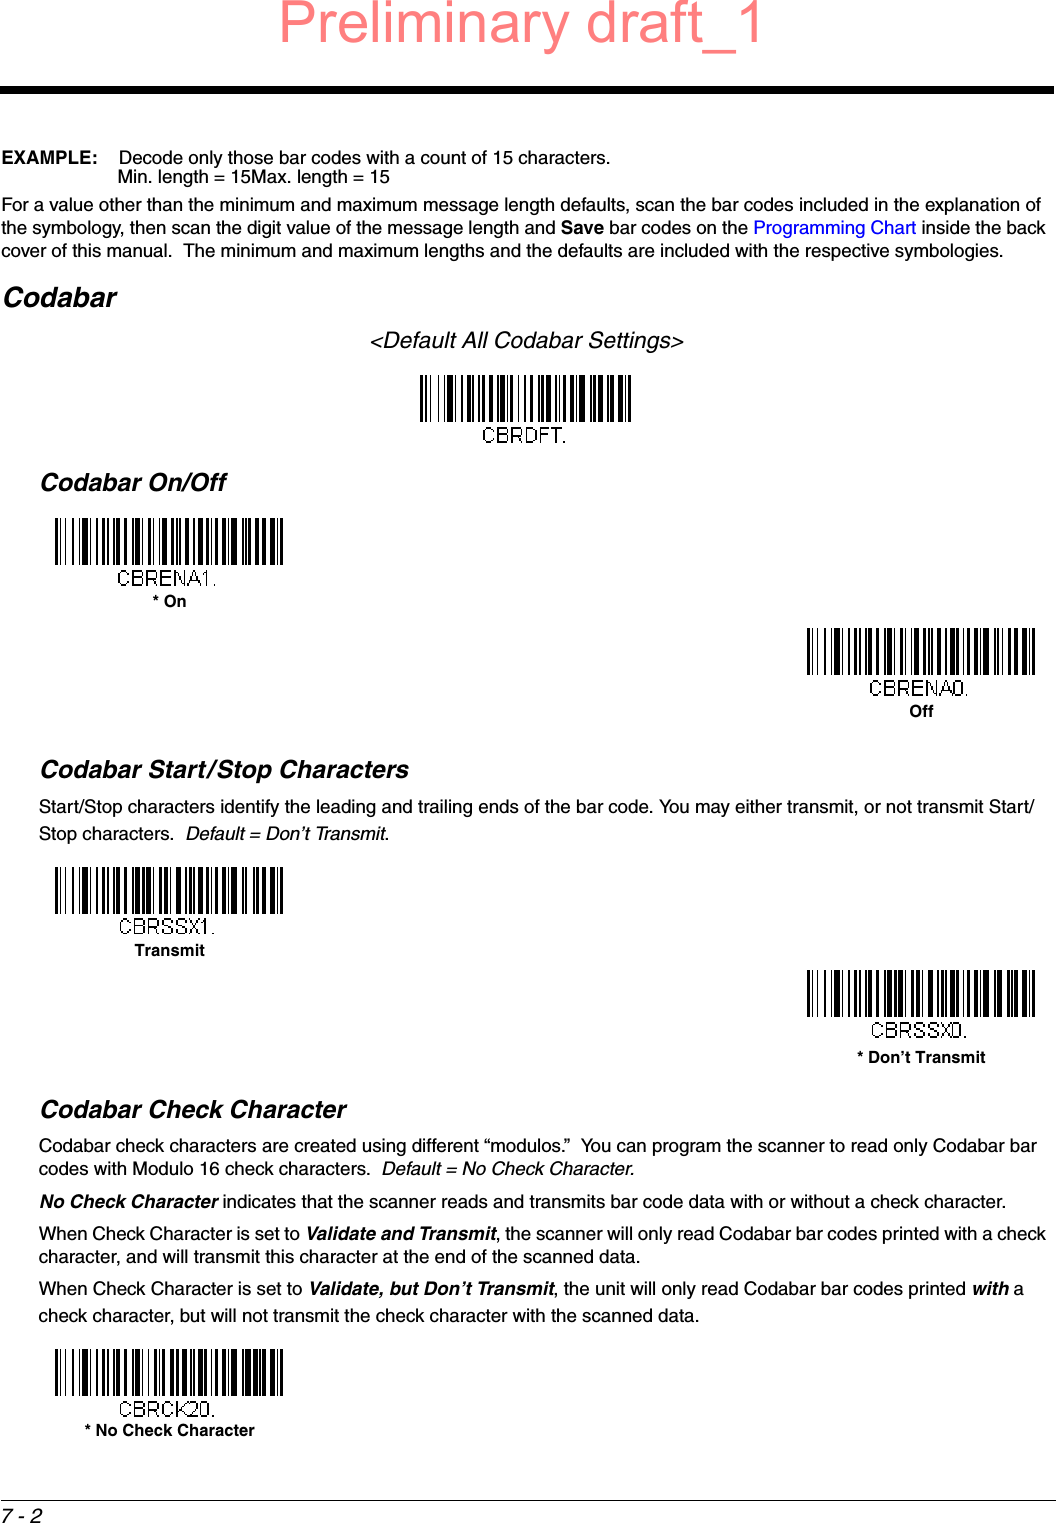 7 - 2EXAMPLE: Decode only those bar codes with a count of 15 characters.Min. length = 15Max. length = 15For a value other than the minimum and maximum message length defaults, scan the bar codes included in the explanation of the symbology, then scan the digit value of the message length and Save bar codes on the Programming Chart inside the back cover of this manual.  The minimum and maximum lengths and the defaults are included with the respective symbologies.Codabar&lt;Default All Codabar Settings&gt;Codabar On/OffCodabar Start/Stop CharactersStart/Stop characters identify the leading and trailing ends of the bar code. You may either transmit, or not transmit Start/Stop characters.  Default = Don’t Transmit.Codabar Check CharacterCodabar check characters are created using different “modulos.”  You can program the scanner to read only Codabar bar codes with Modulo 16 check characters.  Default = No Check Character.No Check Character indicates that the scanner reads and transmits bar code data with or without a check character.When Check Character is set to Validate and Transmit, the scanner will only read Codabar bar codes printed with a check character, and will transmit this character at the end of the scanned data.When Check Character is set to Validate, but Don’t Transmit, the unit will only read Codabar bar codes printed with a check character, but will not transmit the check character with the scanned data.* OnOffTransmit* Don’t Transmit* No Check CharacterPreliminary draft_1